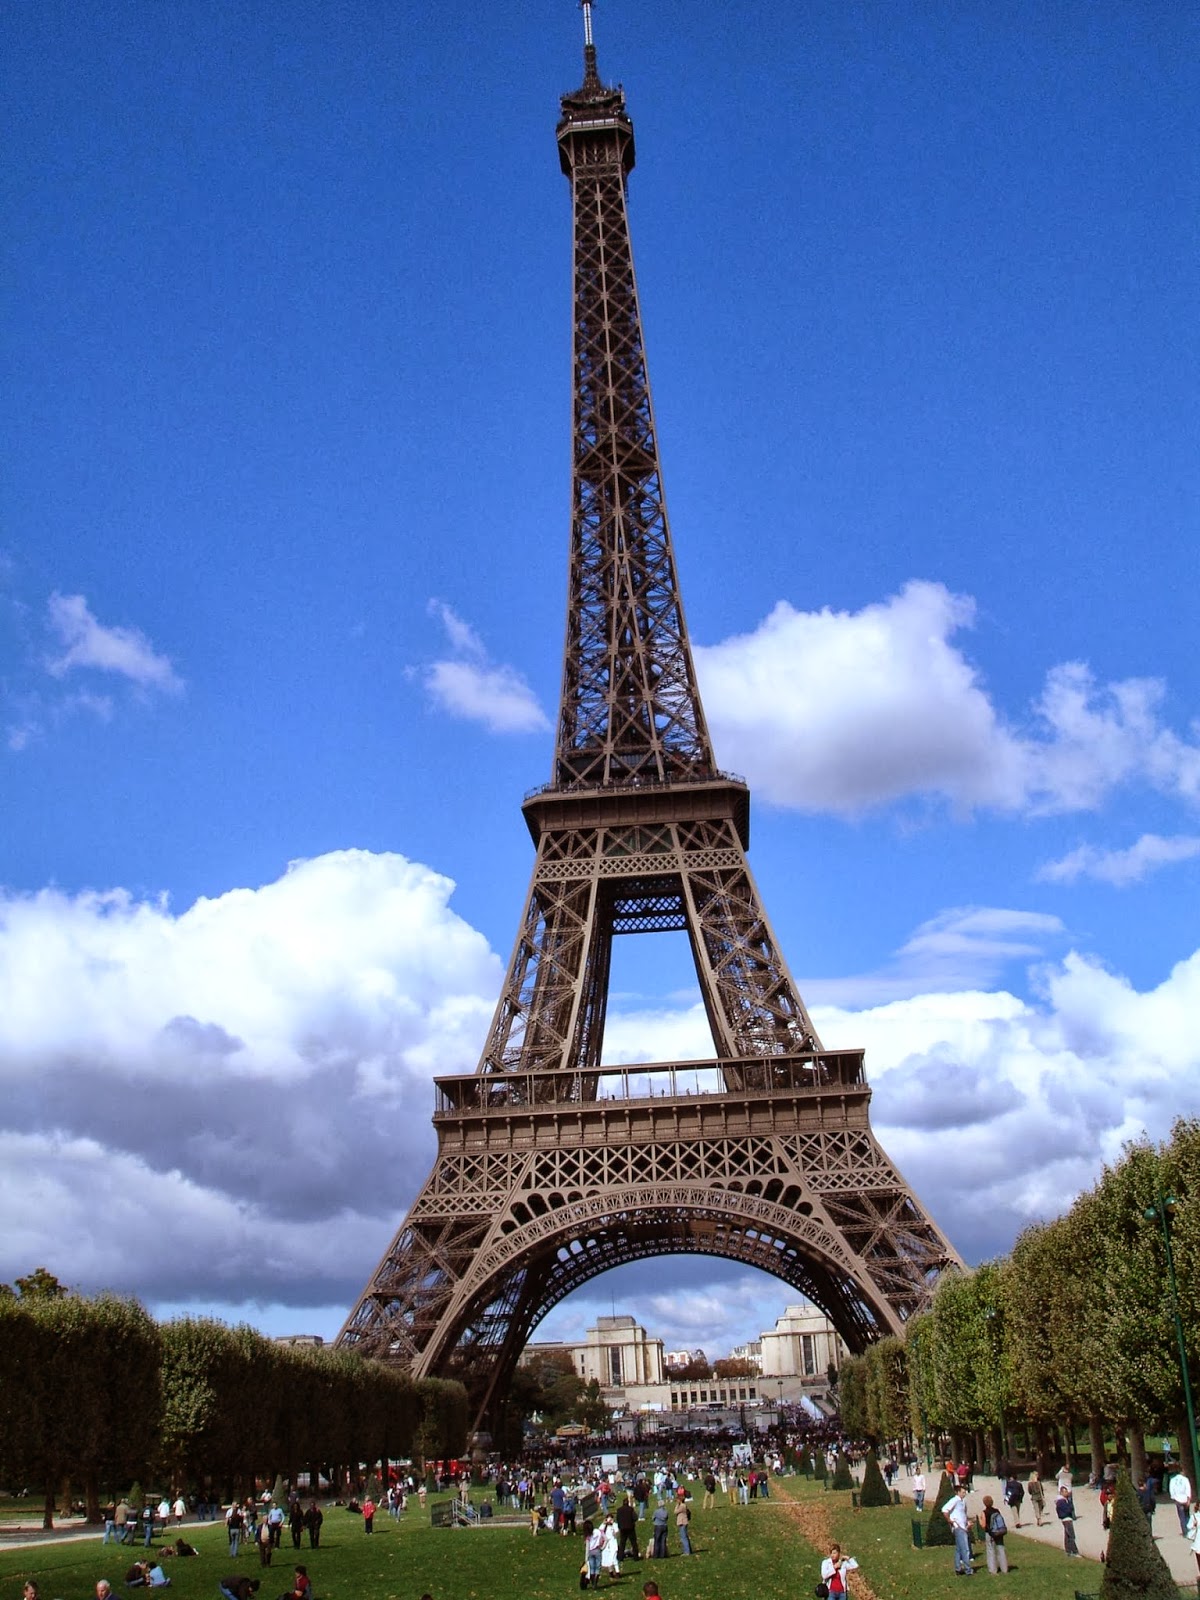 Eiffel Tower Wallpaper For Iphone Images amp Pictures   Becuo